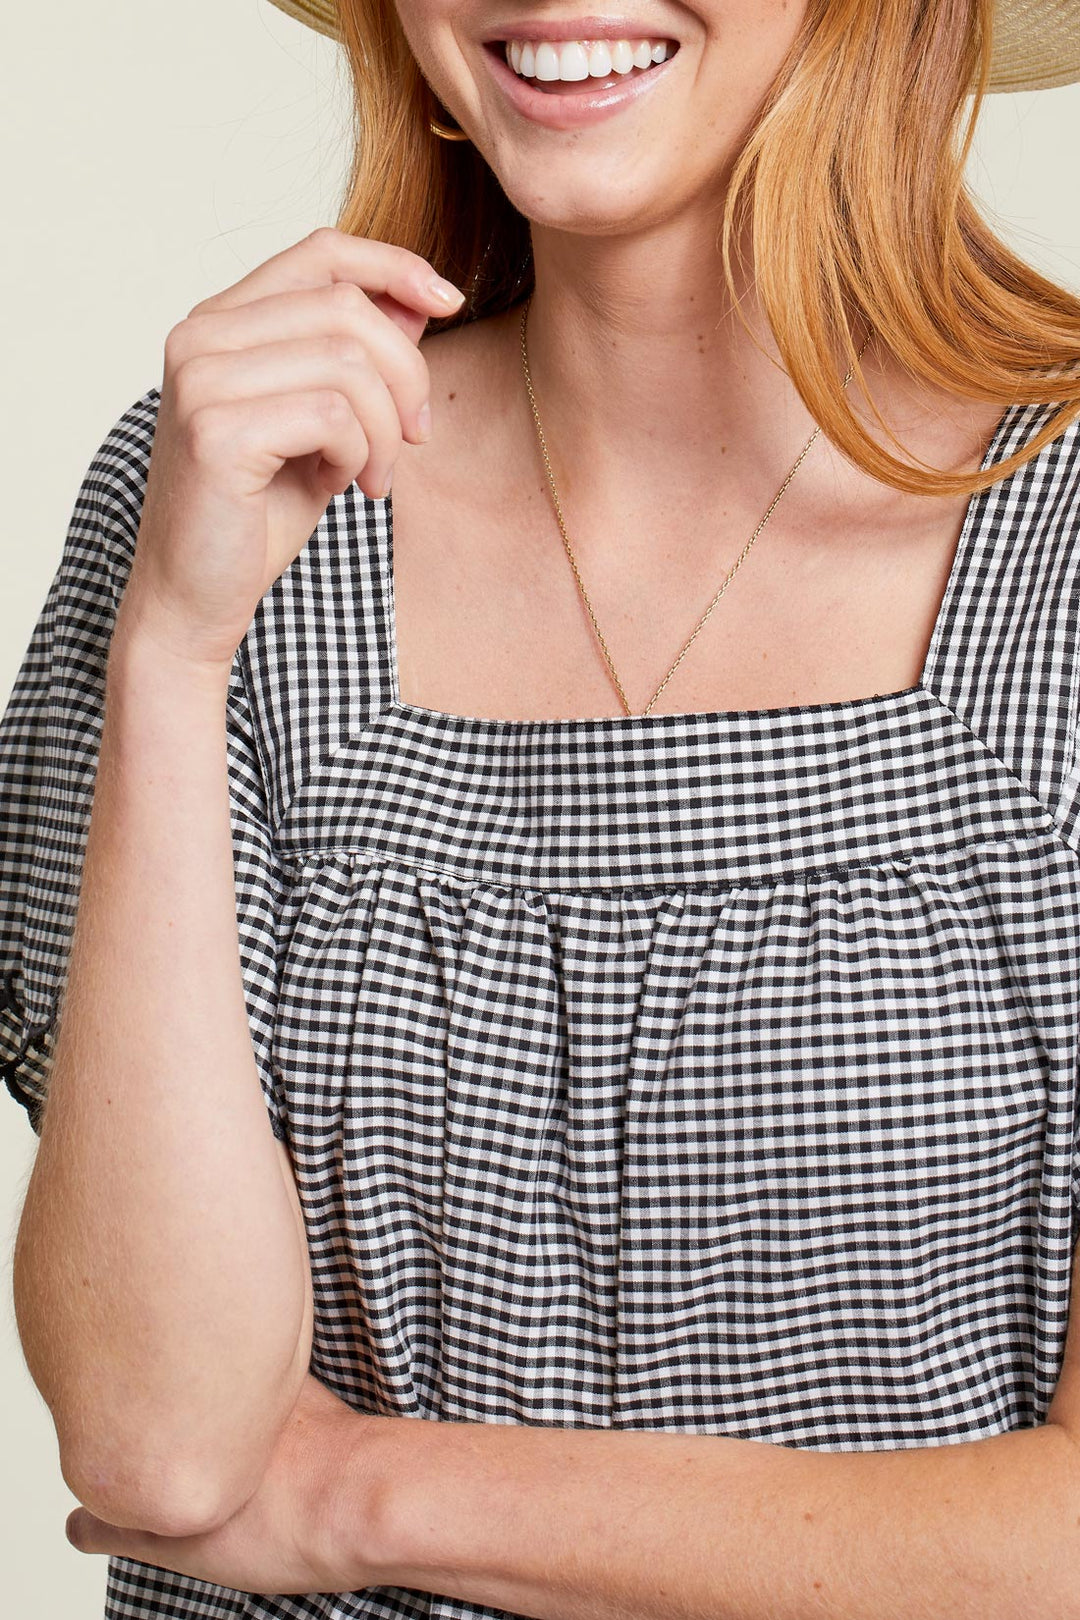 Square-Neck Checkered Short Sleeve Blouse